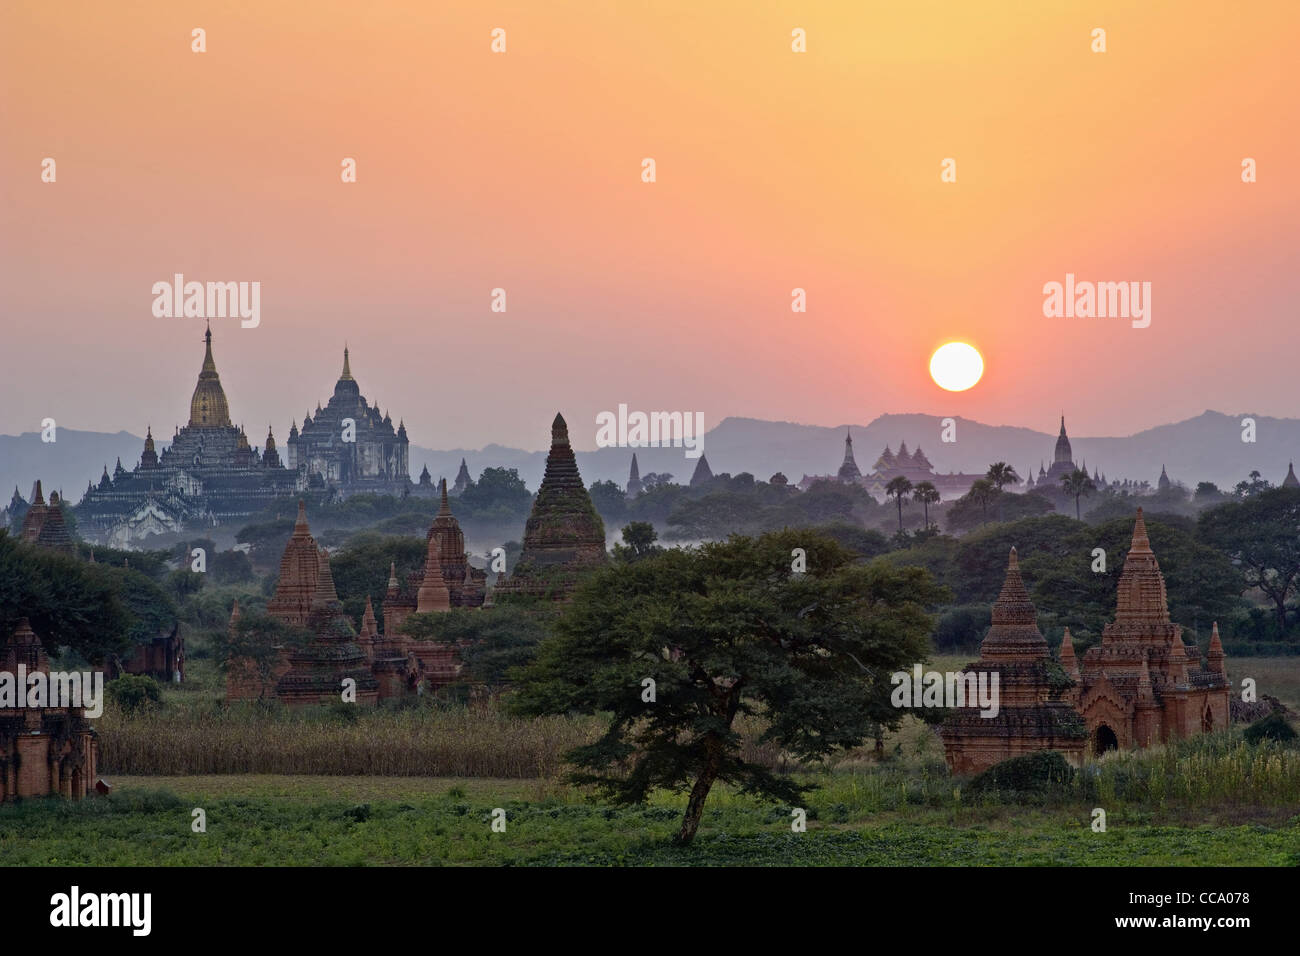 Remains of the Day on the Plain of Temples | Bagan (Pagan) | Myanmar (Burma) Stock Photo